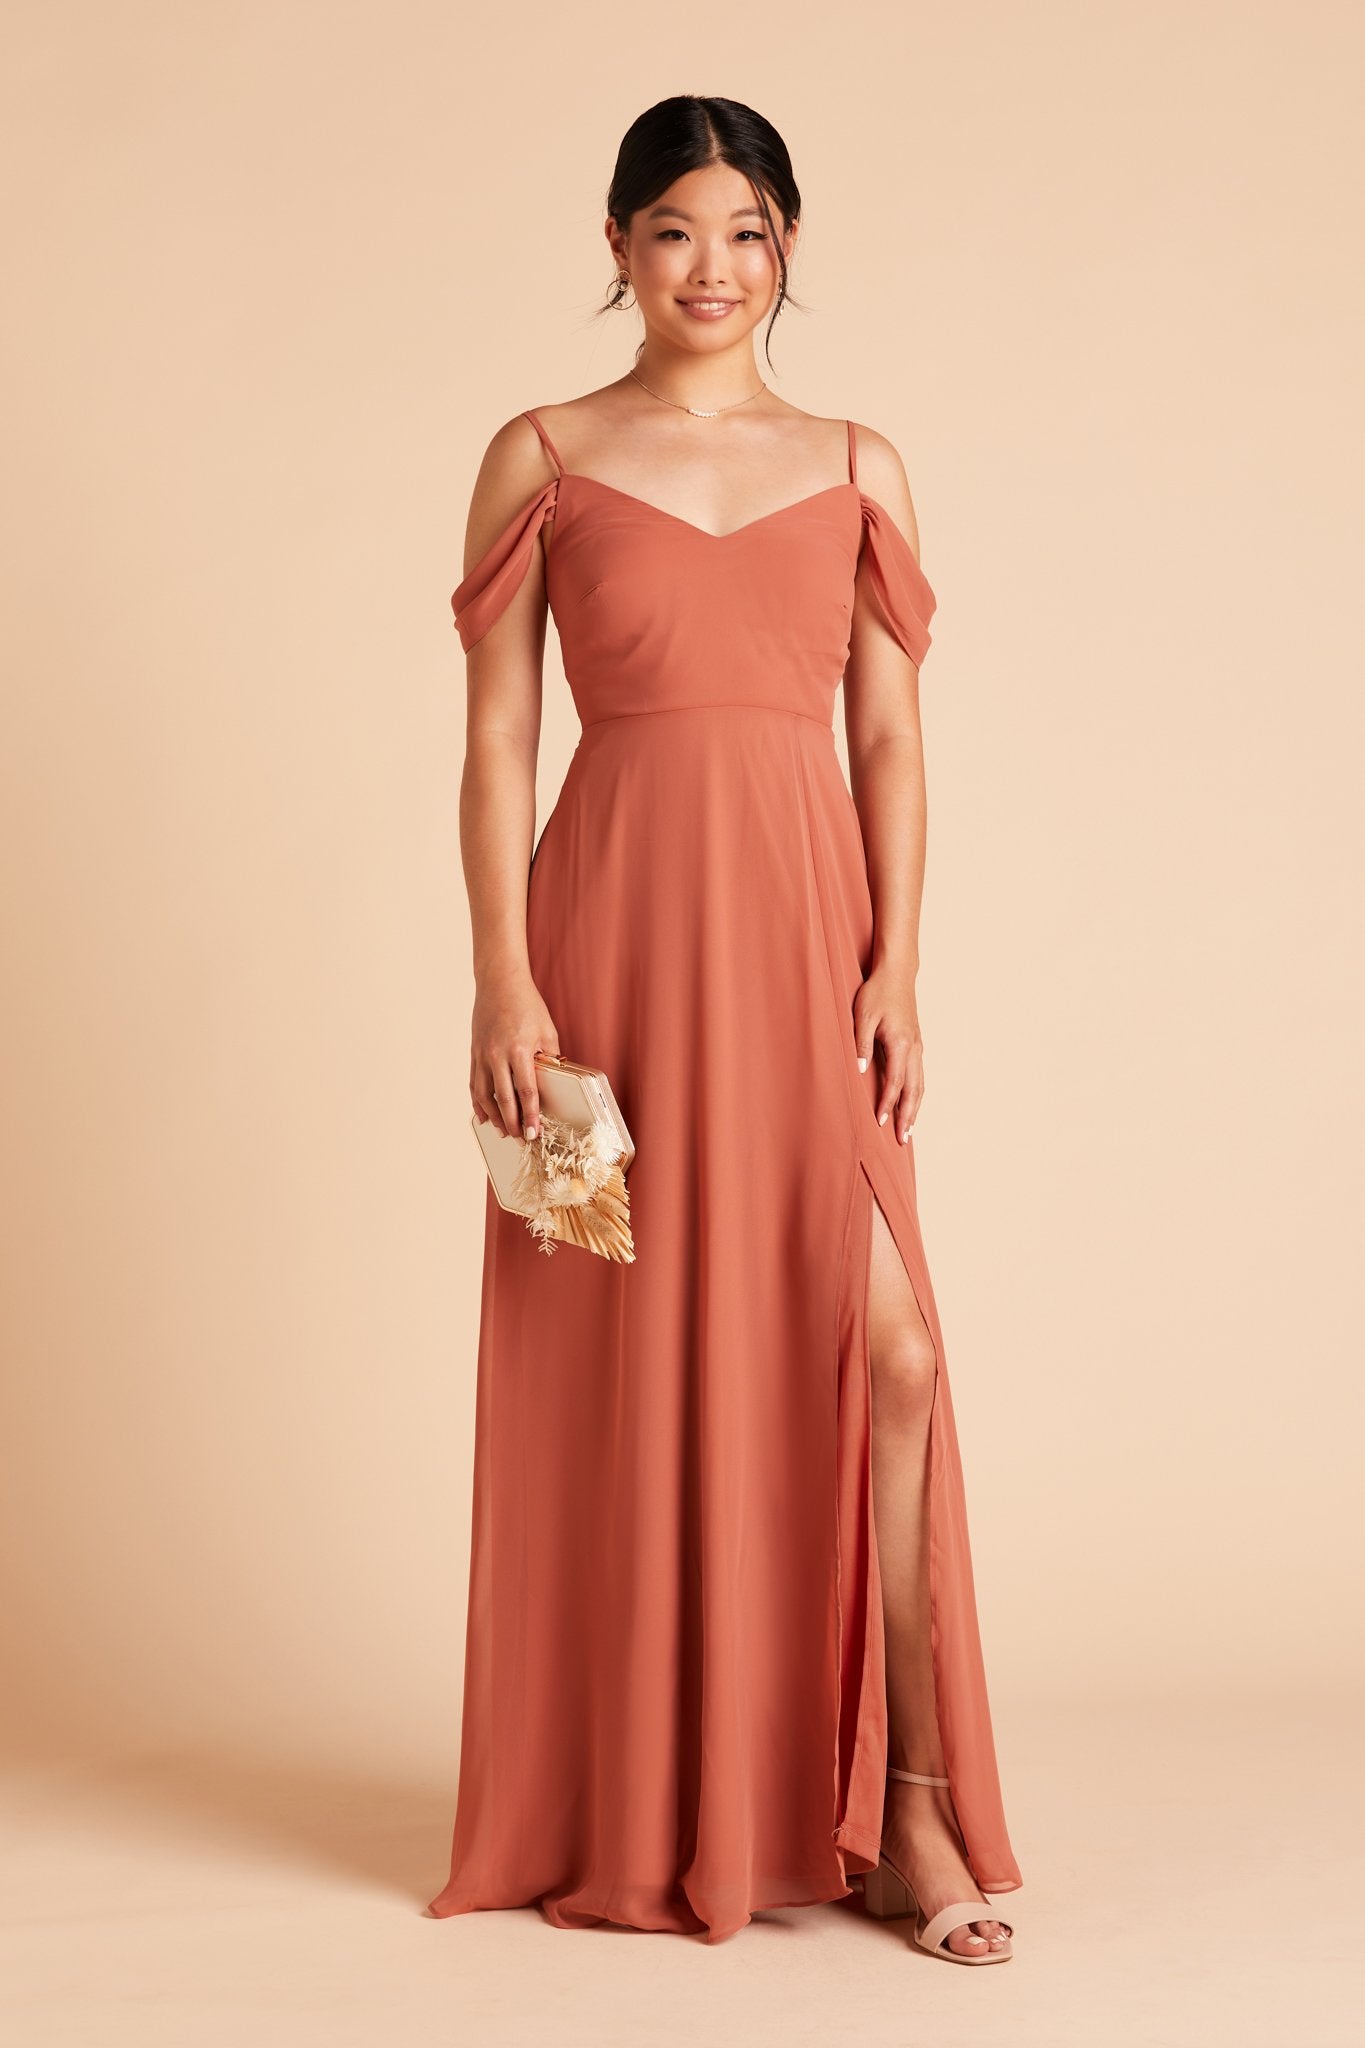 Front view of the floor-length Devin Convertible Bridesmaid Dress in terracotta chiffon by Birdy Grey with a V-neck front and draping detachable sleeves. The dress features an optional slit over the left front leg.